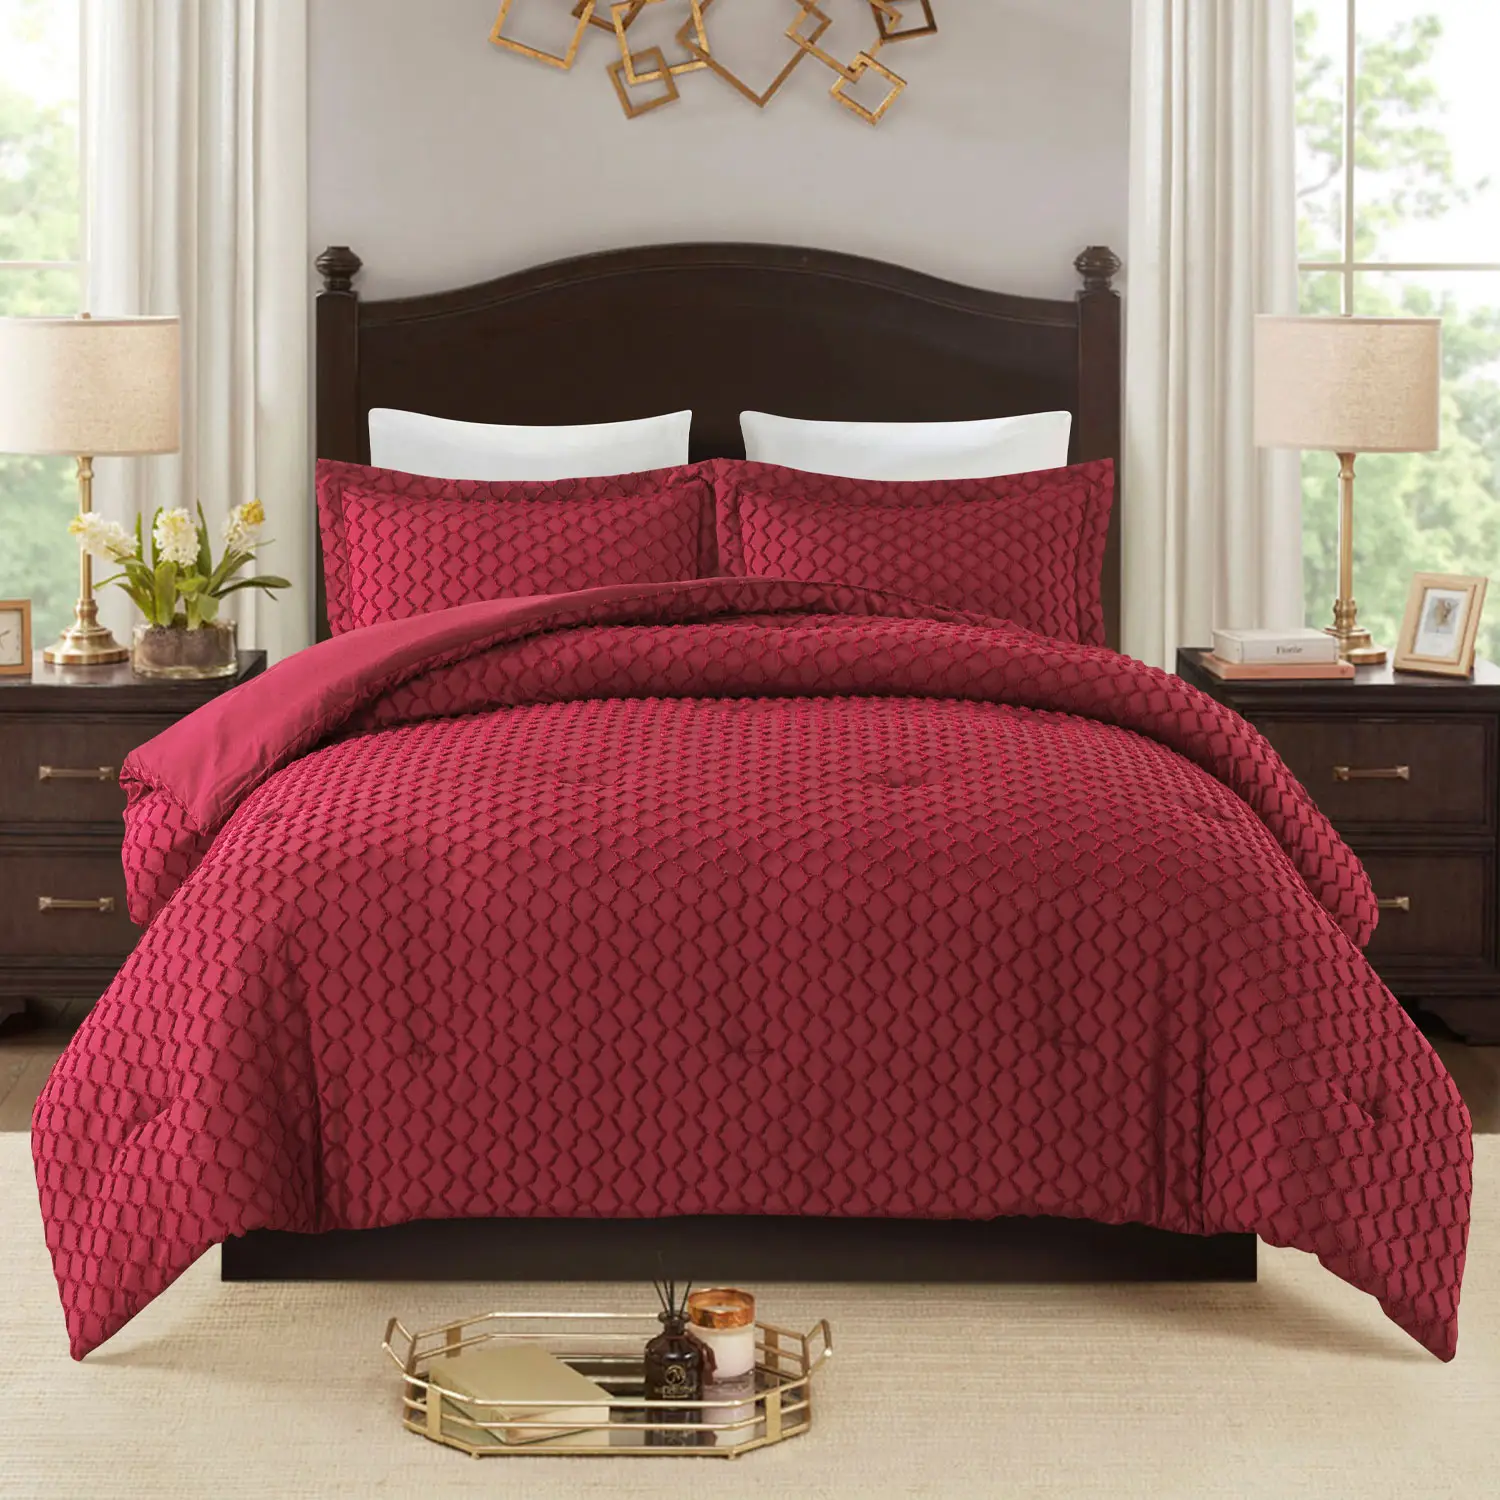 JML Bed In A Bag Jacquard Comforter Set With Tufted Diamond Pillowcases